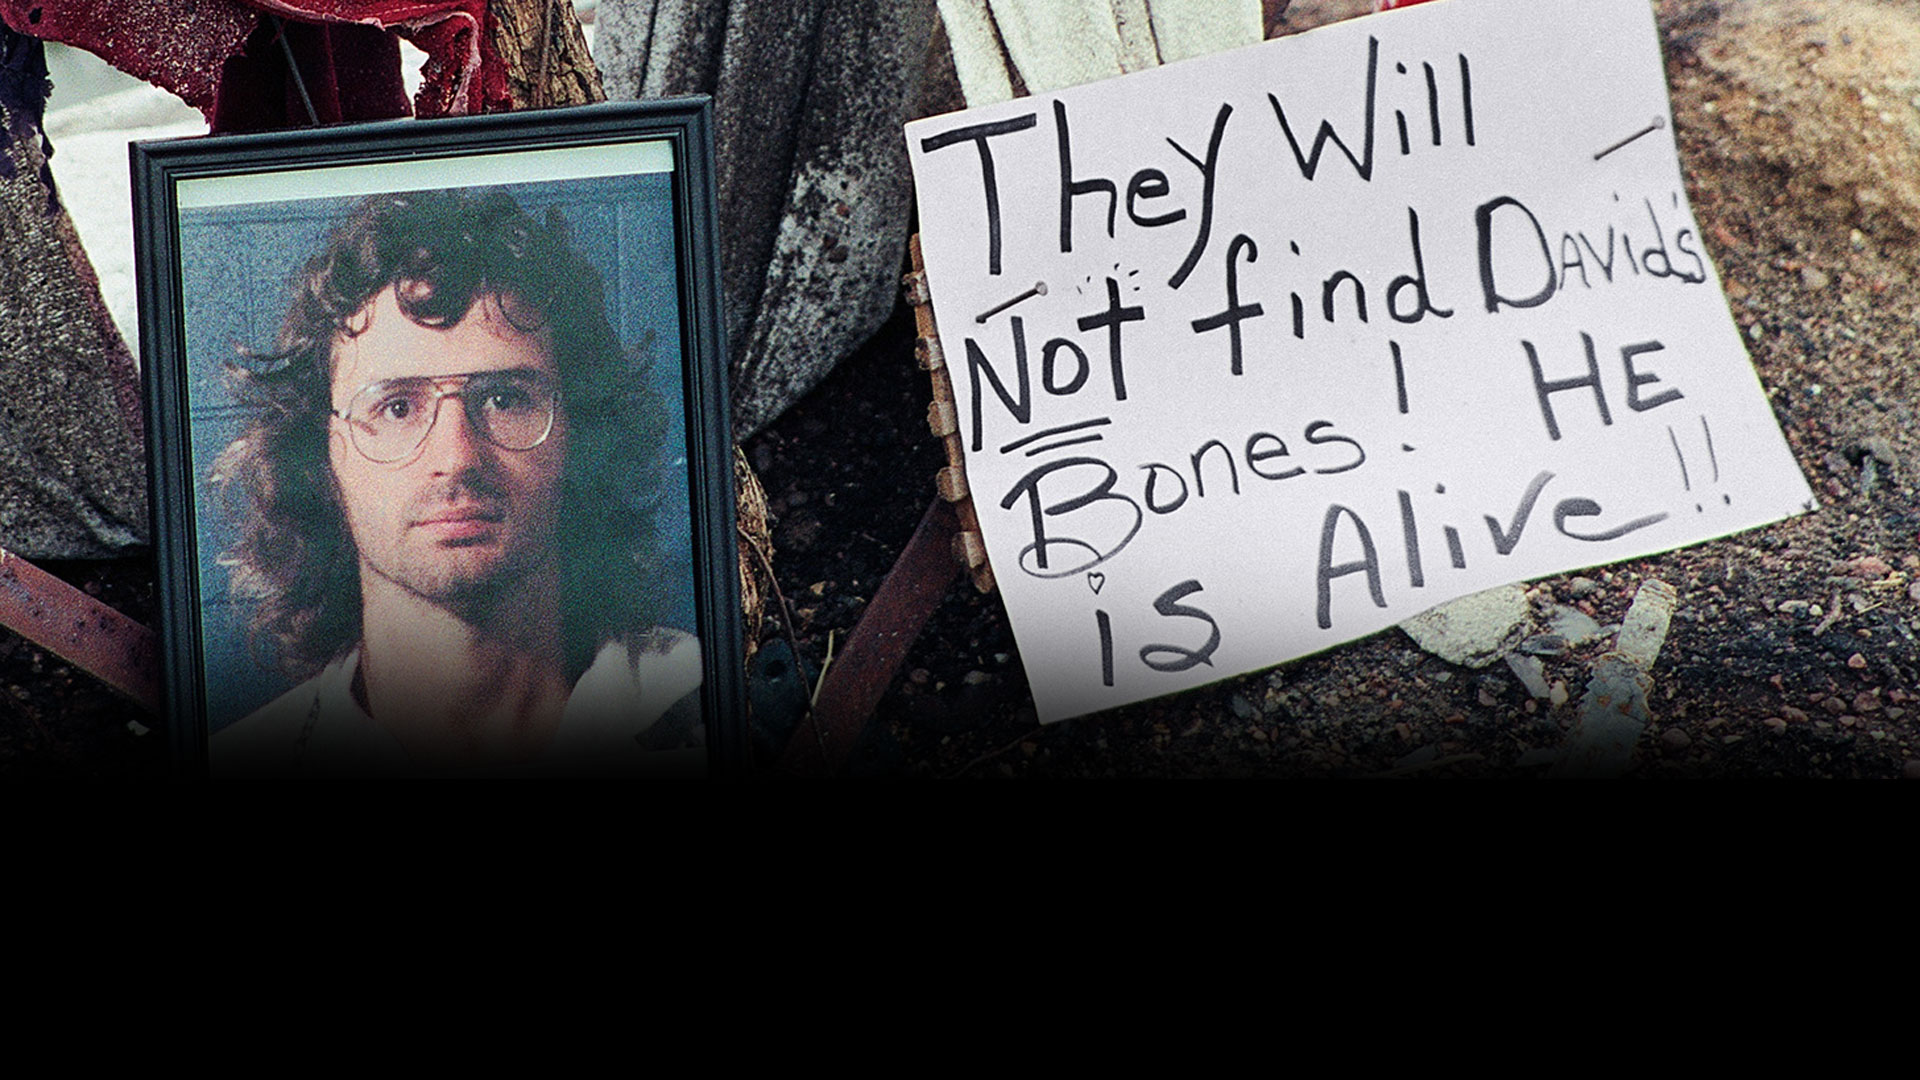 David Koresh and the Branch Davidians: 6 Things You Should Know